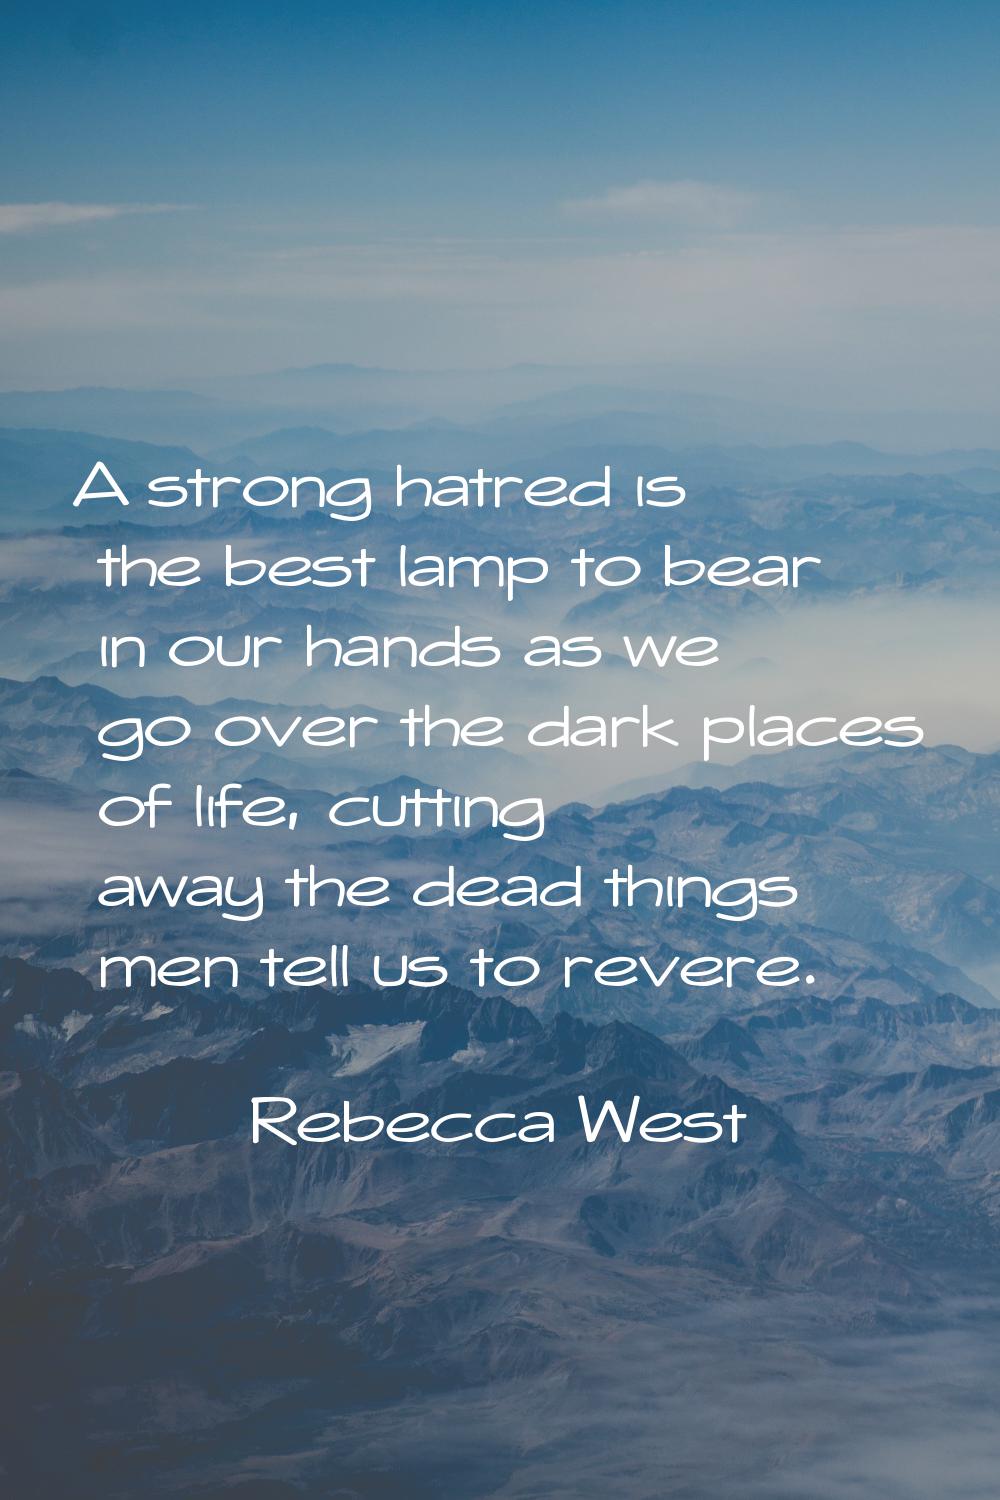 A strong hatred is the best lamp to bear in our hands as we go over the dark places of life, cuttin